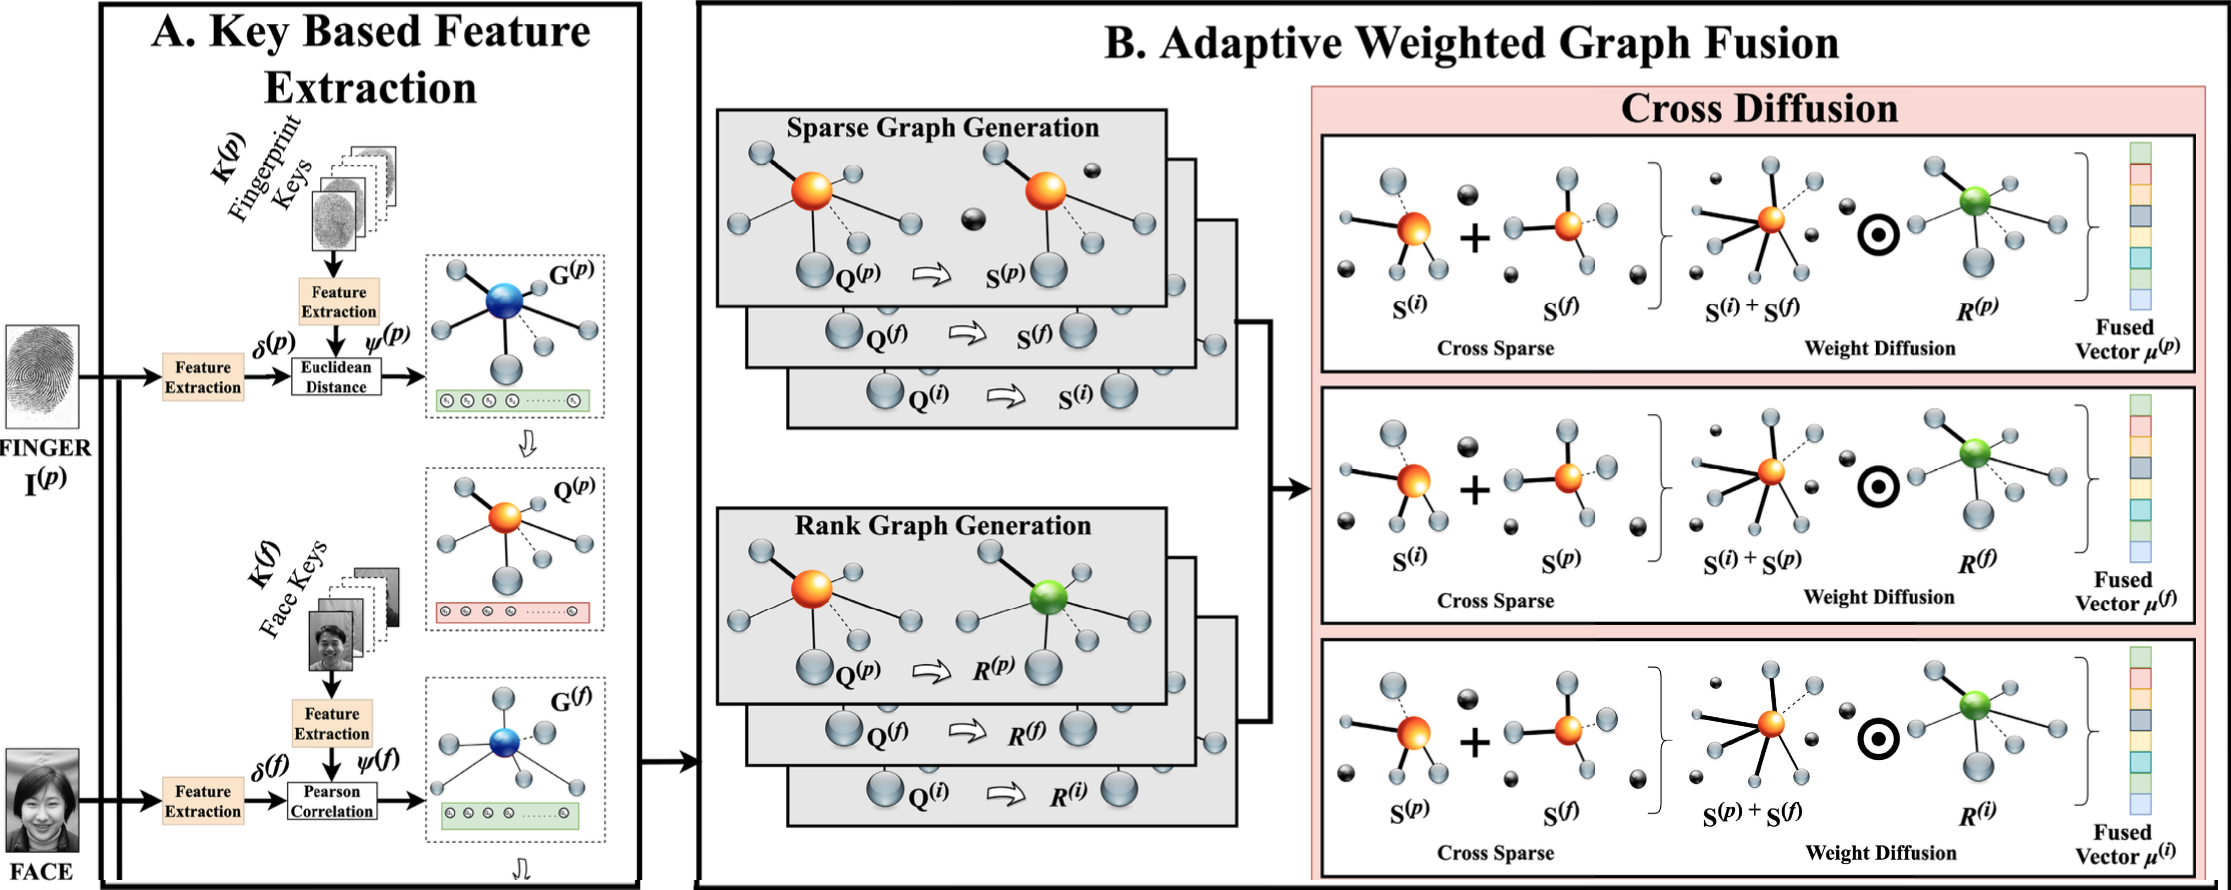 Overview of the proposed architecture showing key-based feature extraction and adaptive weighted graph fusion.